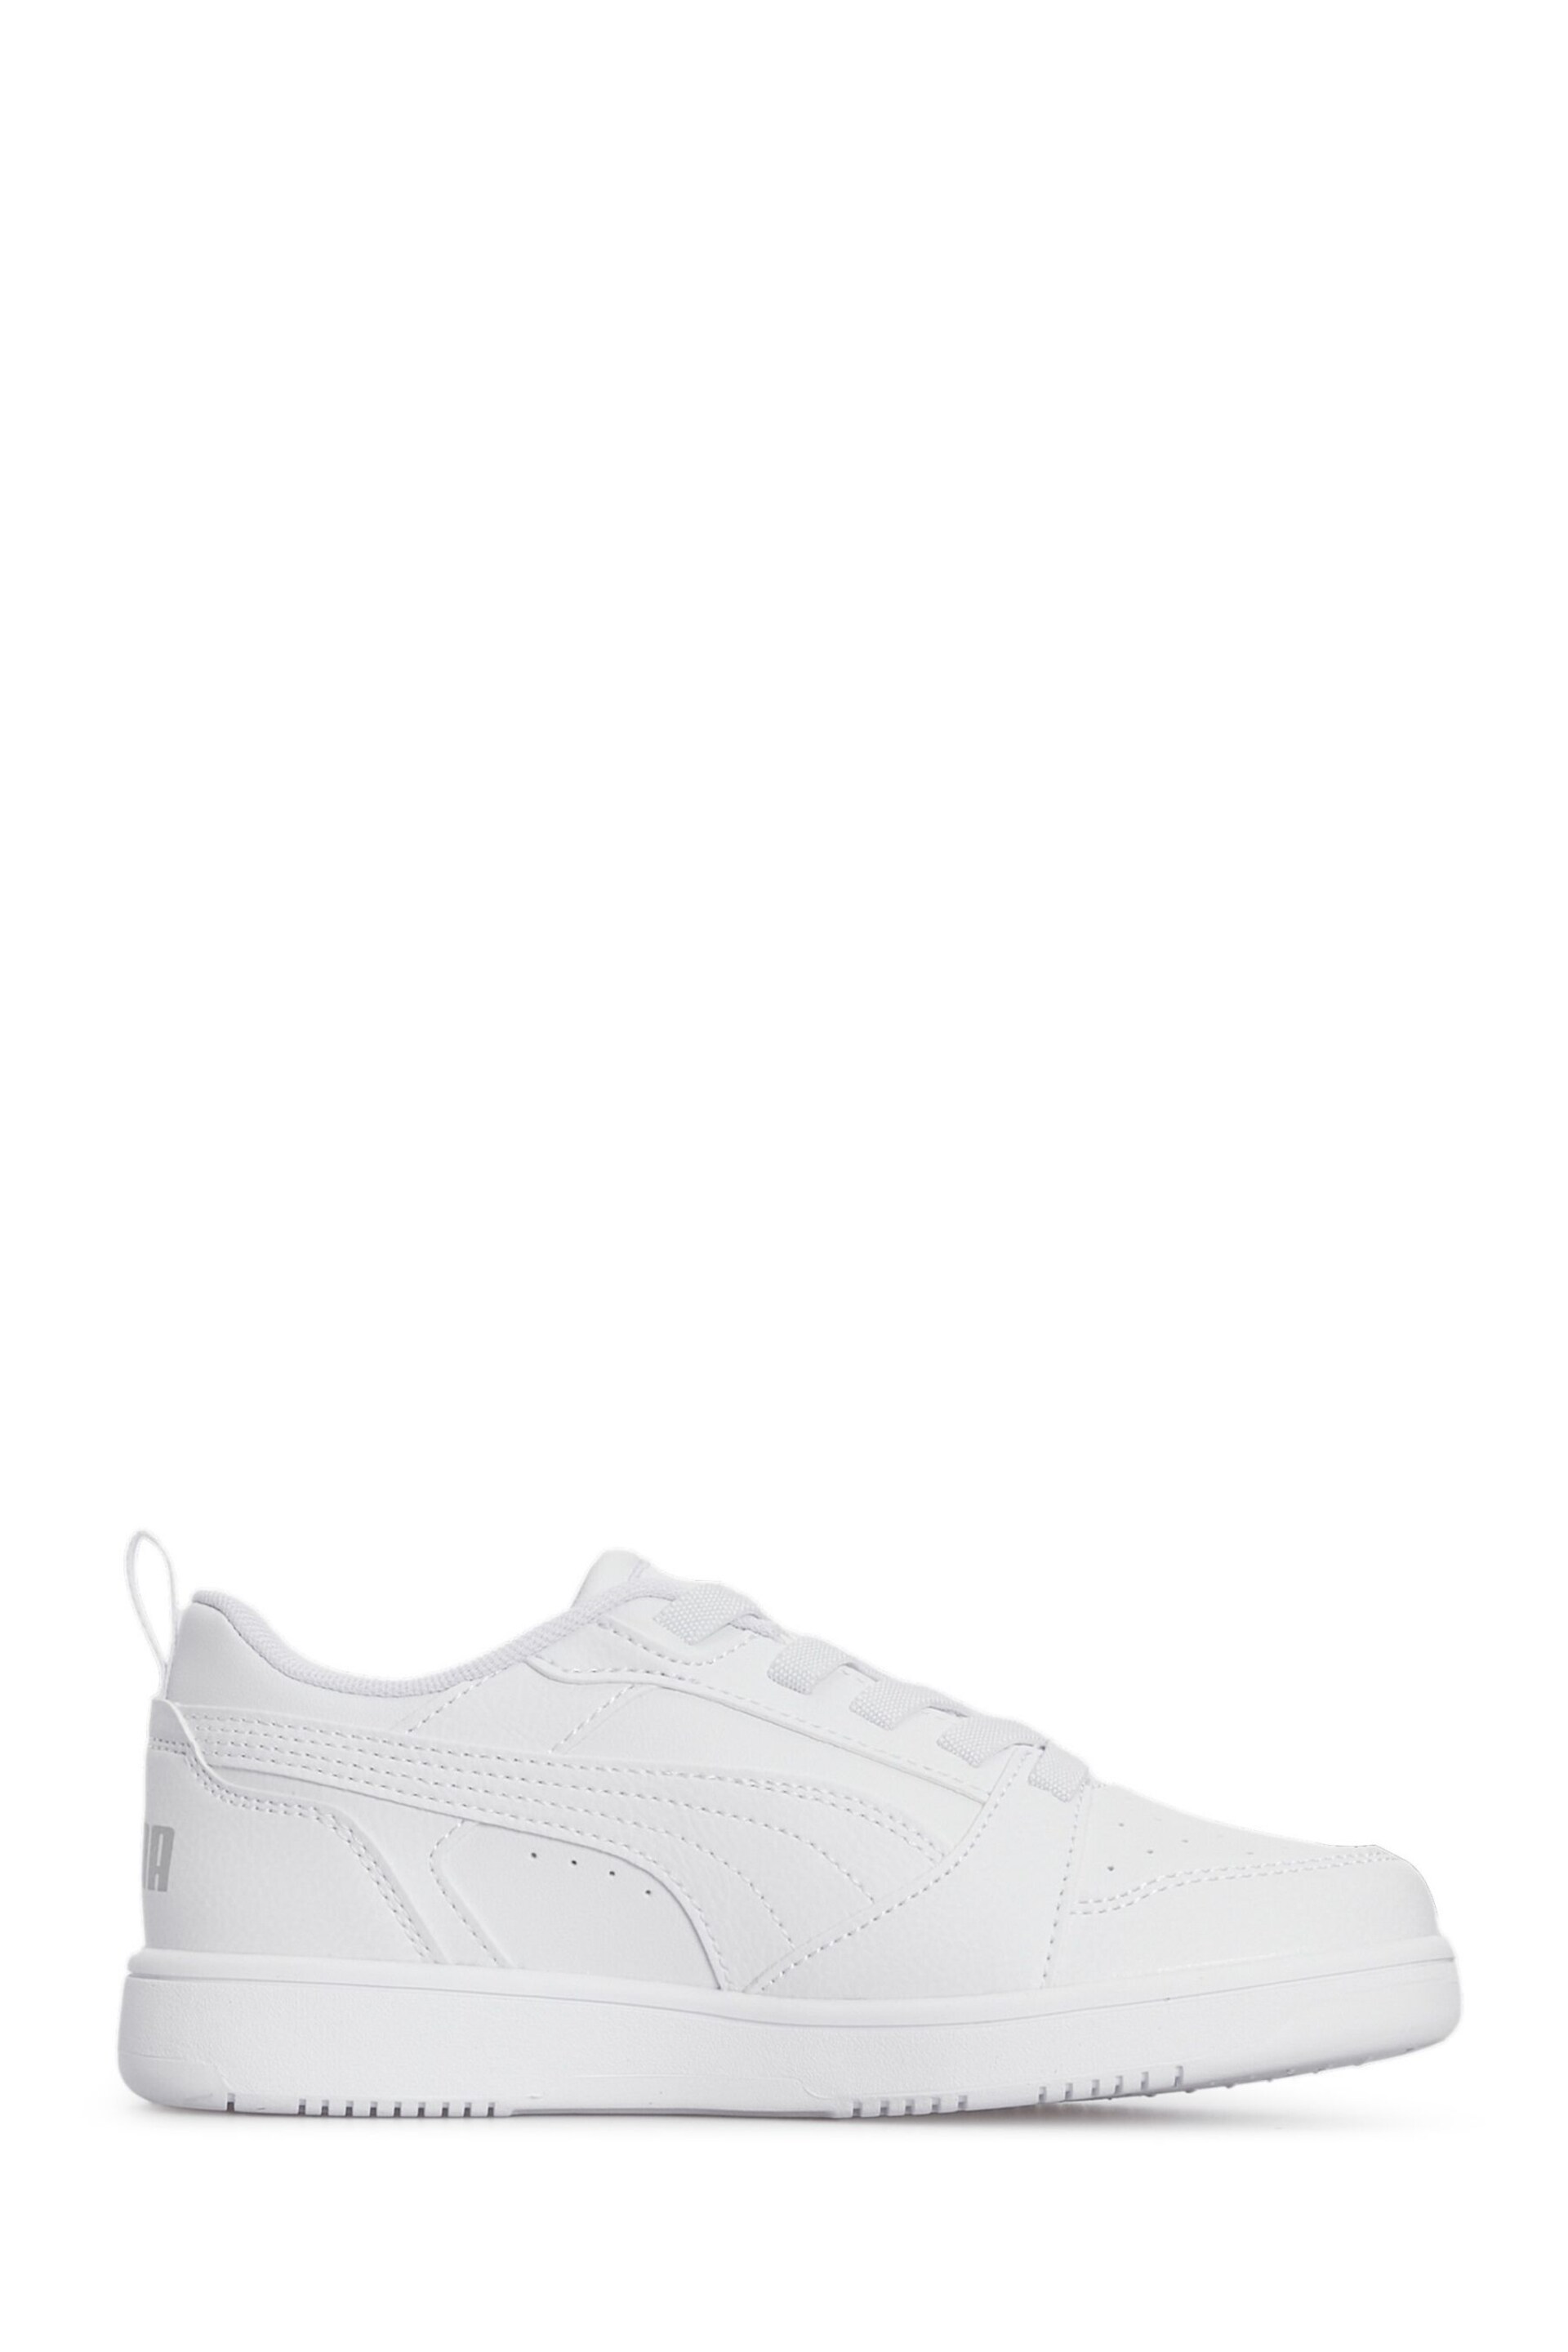 Puma White Unisex Kids Rebound V6 LO Sneakers Trainers - Image 1 of 6